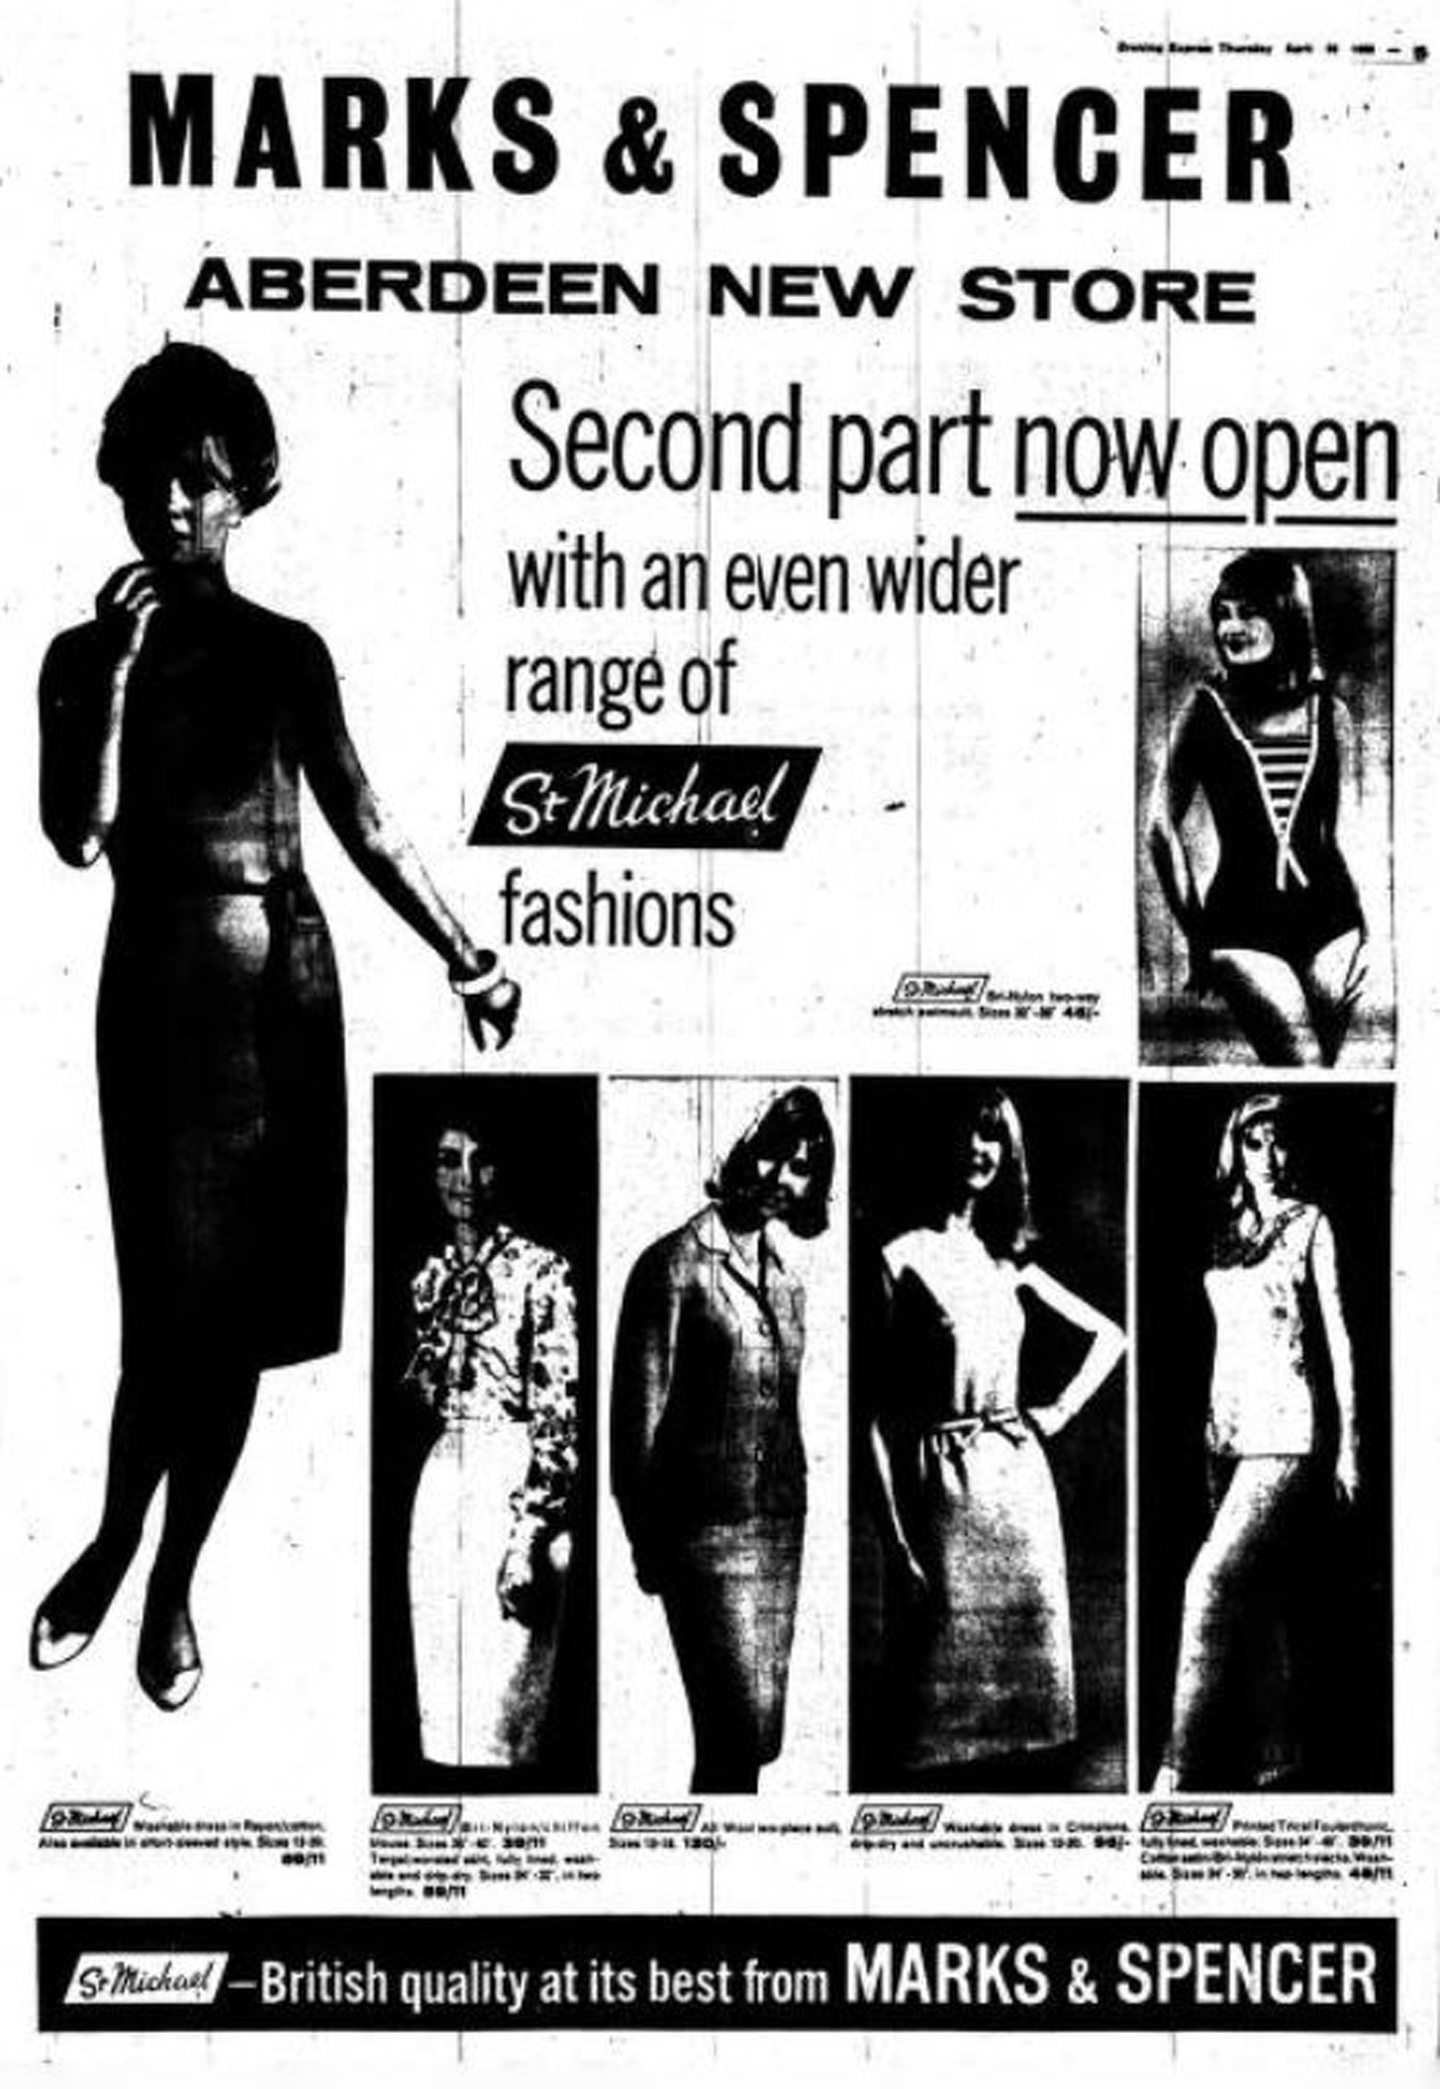 An advert reading "Marks & Spencer Aberdeen new store - Second part now open with an even wider range of St Michael fashions"